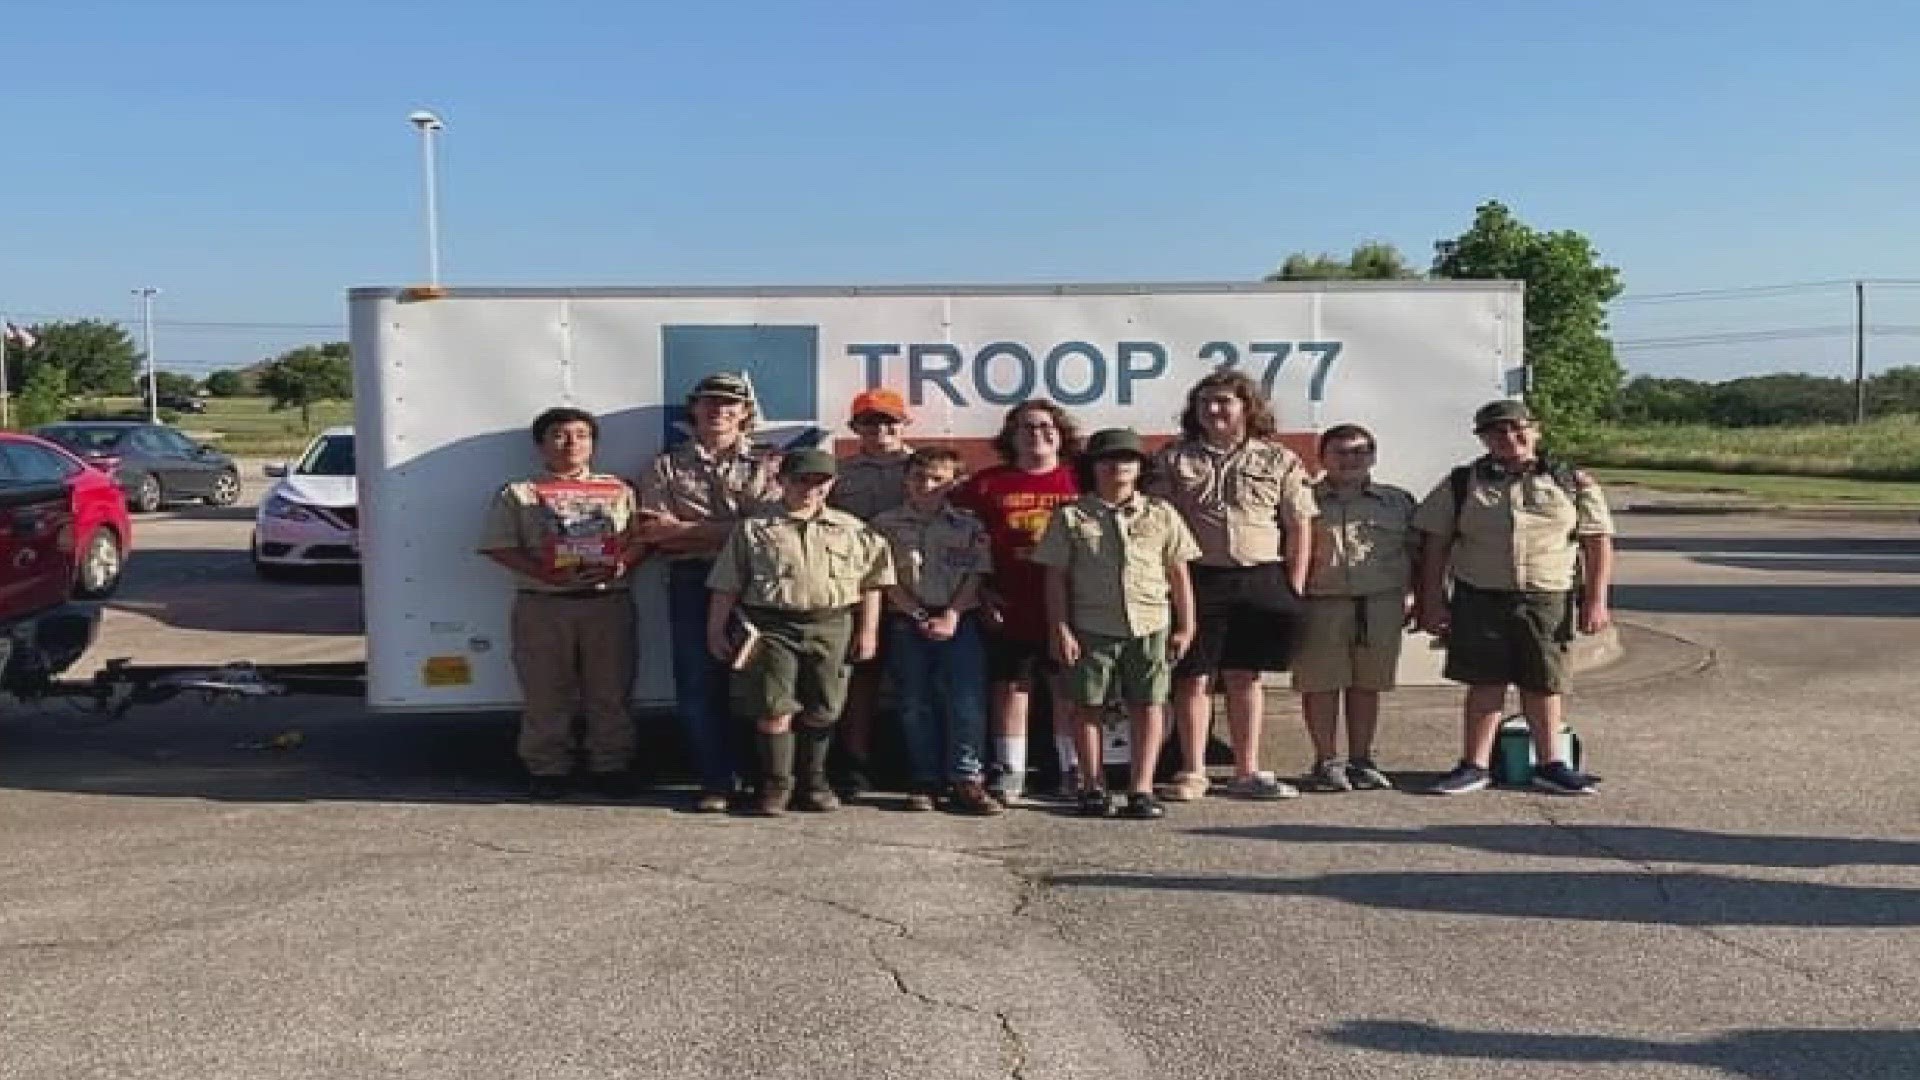 Boy Scout Troop 377 is out thousands of dollars after their trailer was allegedly stolen just before a campout.